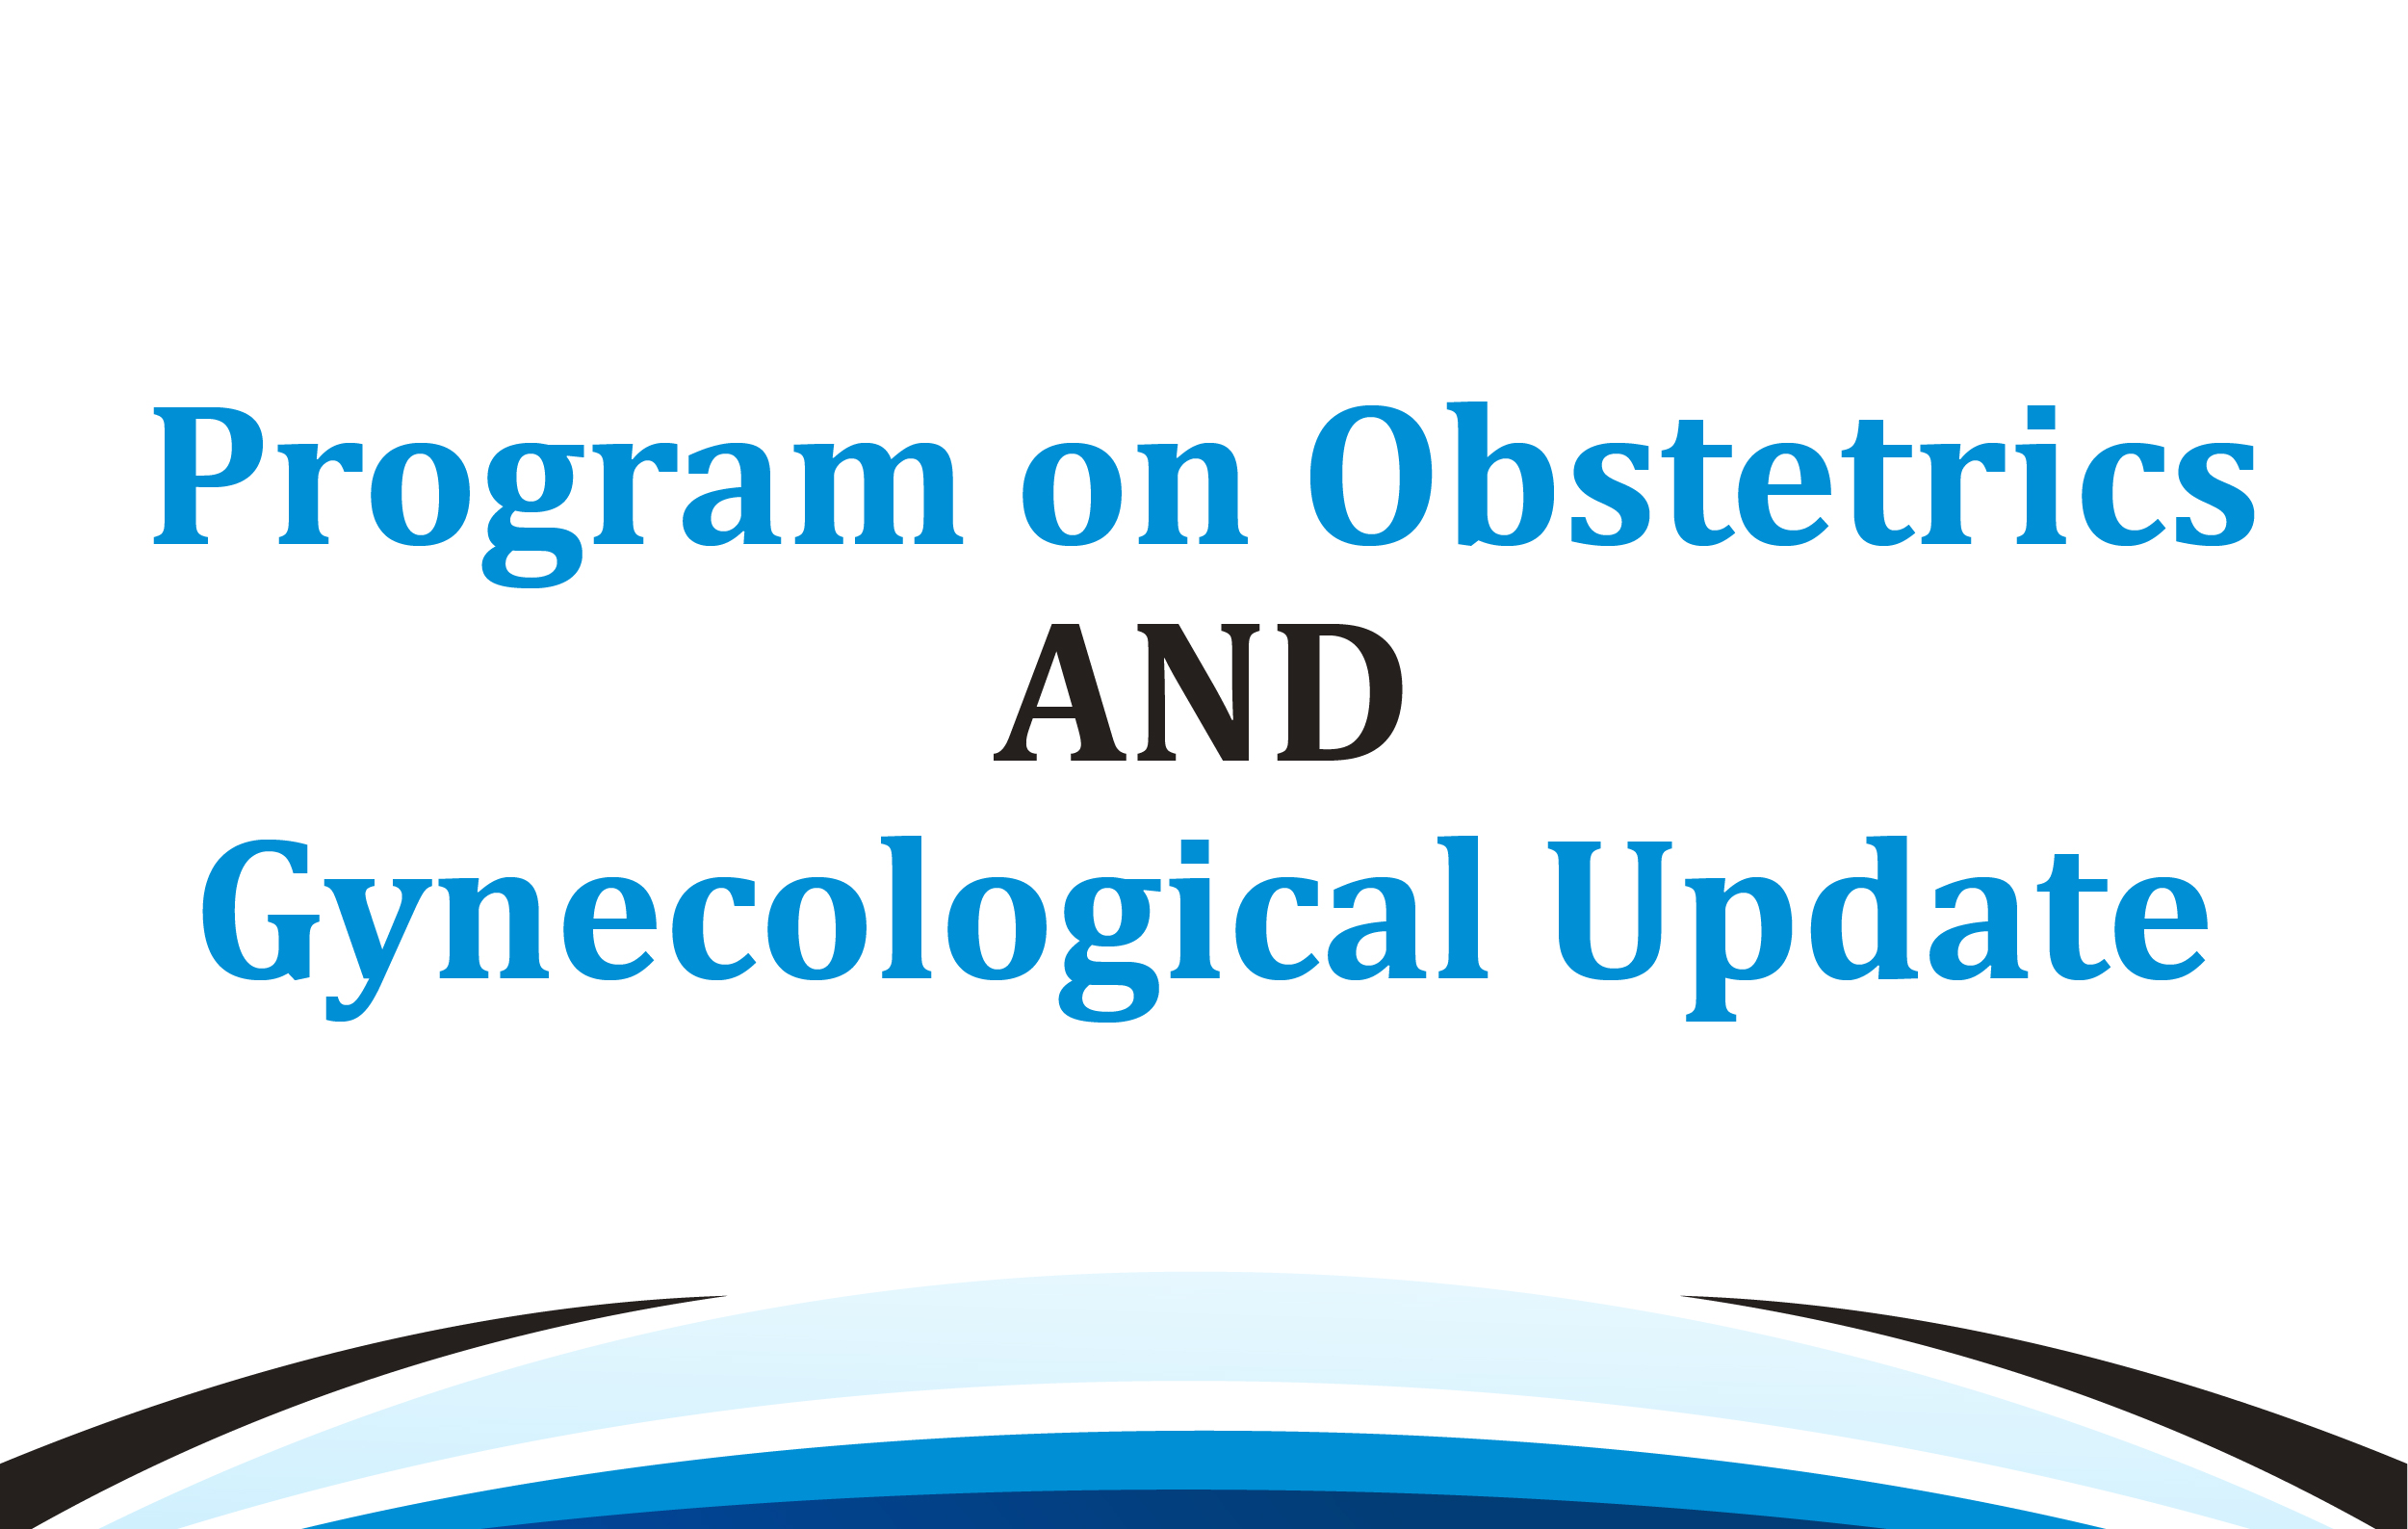 Program on Obstetrics and Gynecological Update